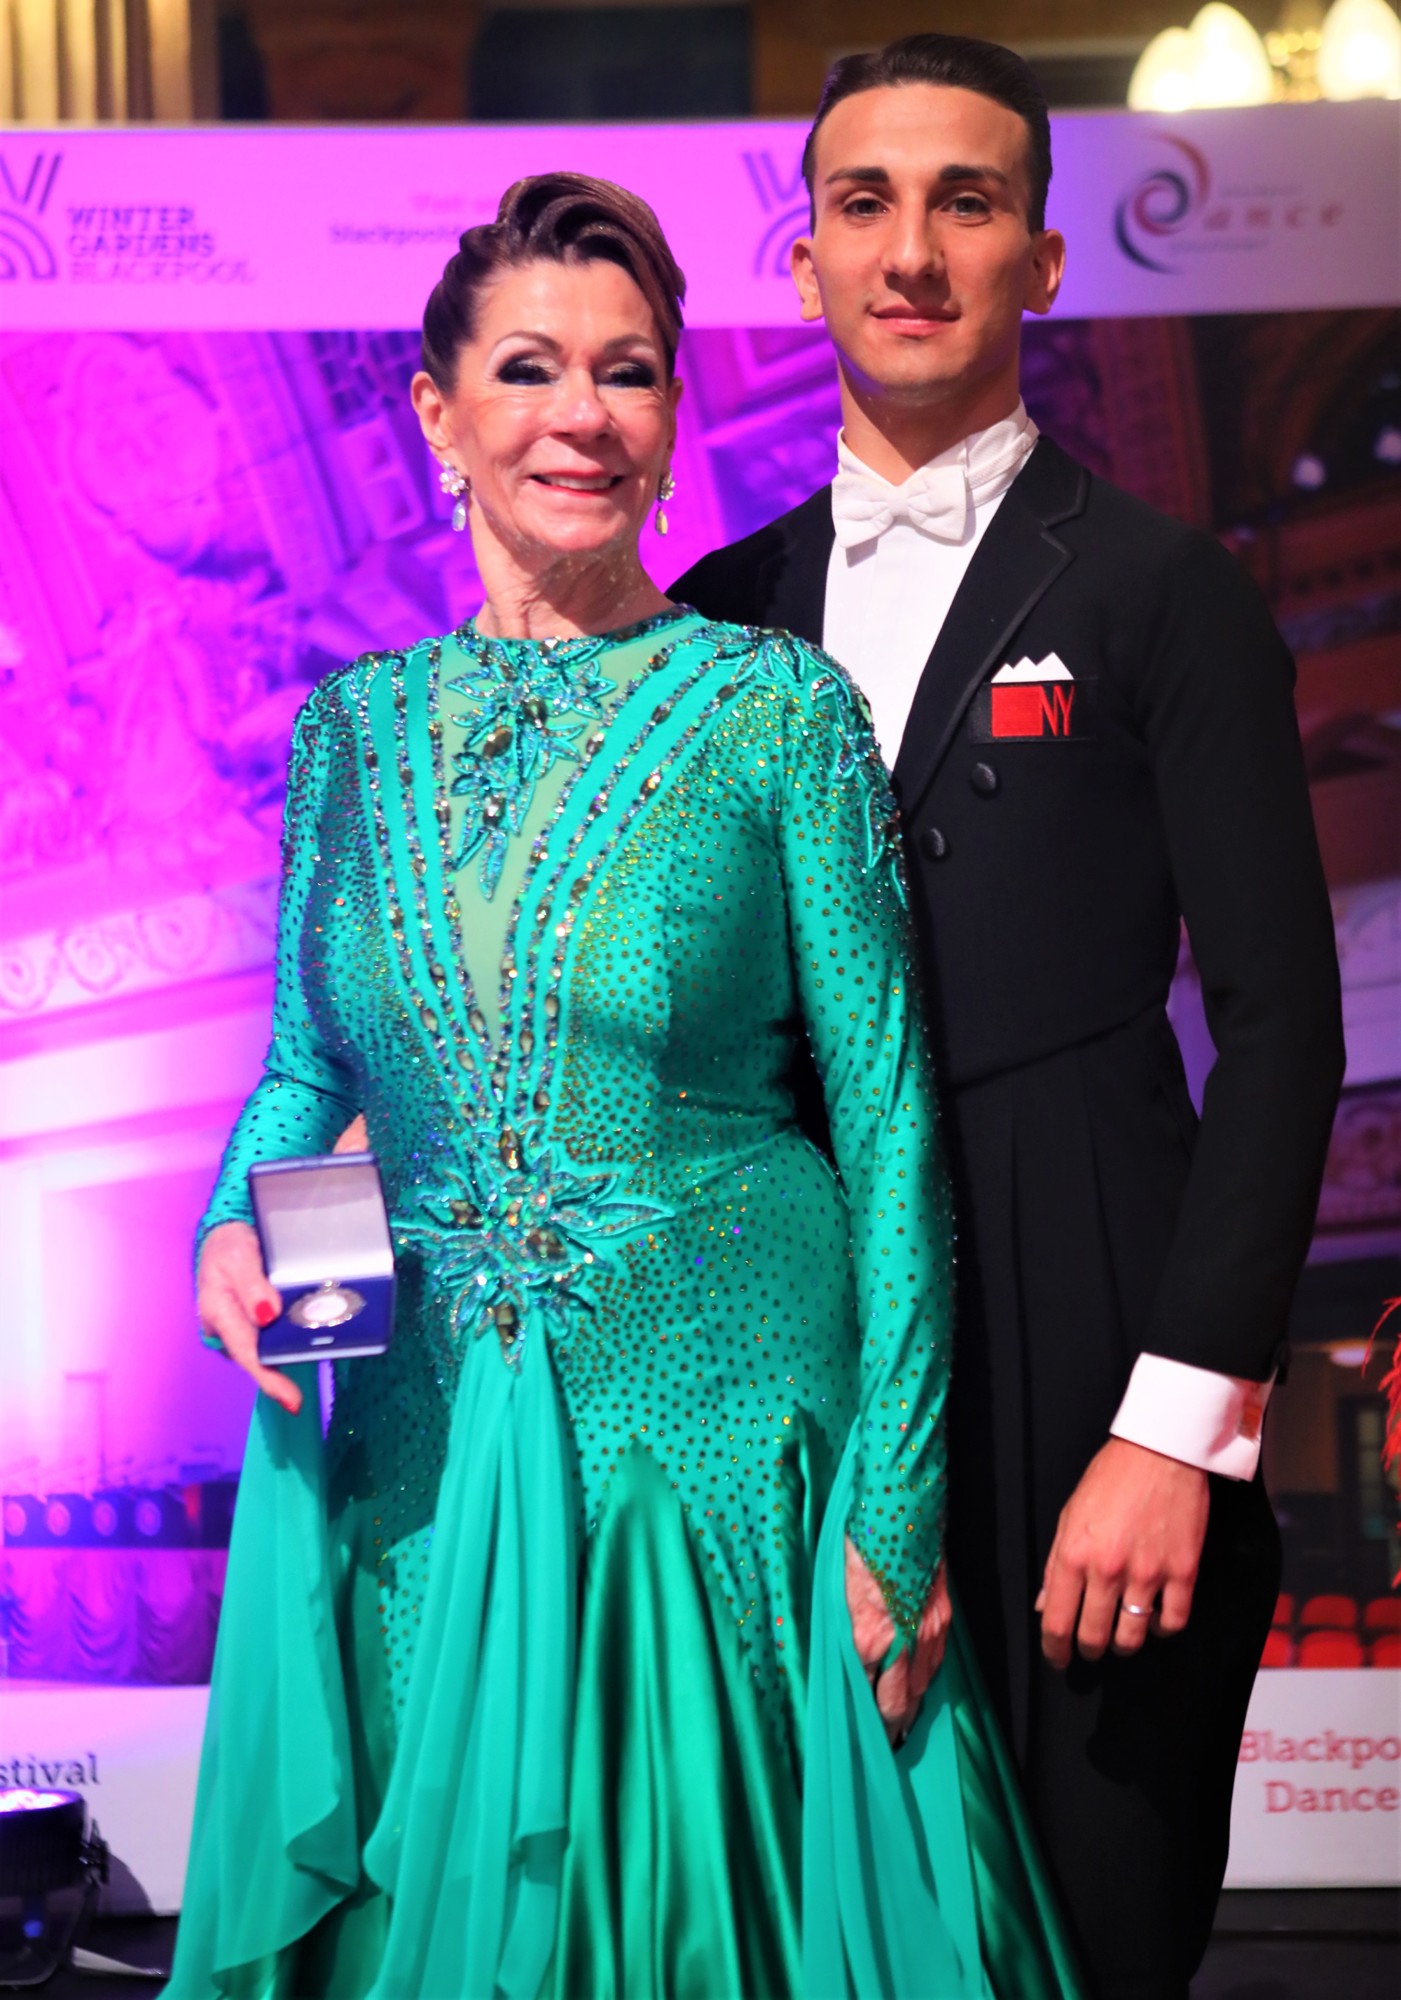 Christine Schneider Downs and Samuele Pugliese took home the title of World Champion in the Pro/Amateur 65+ American Smooth Multi-Dance Championship in the Blackpool Dance Festival. Courtesy photo